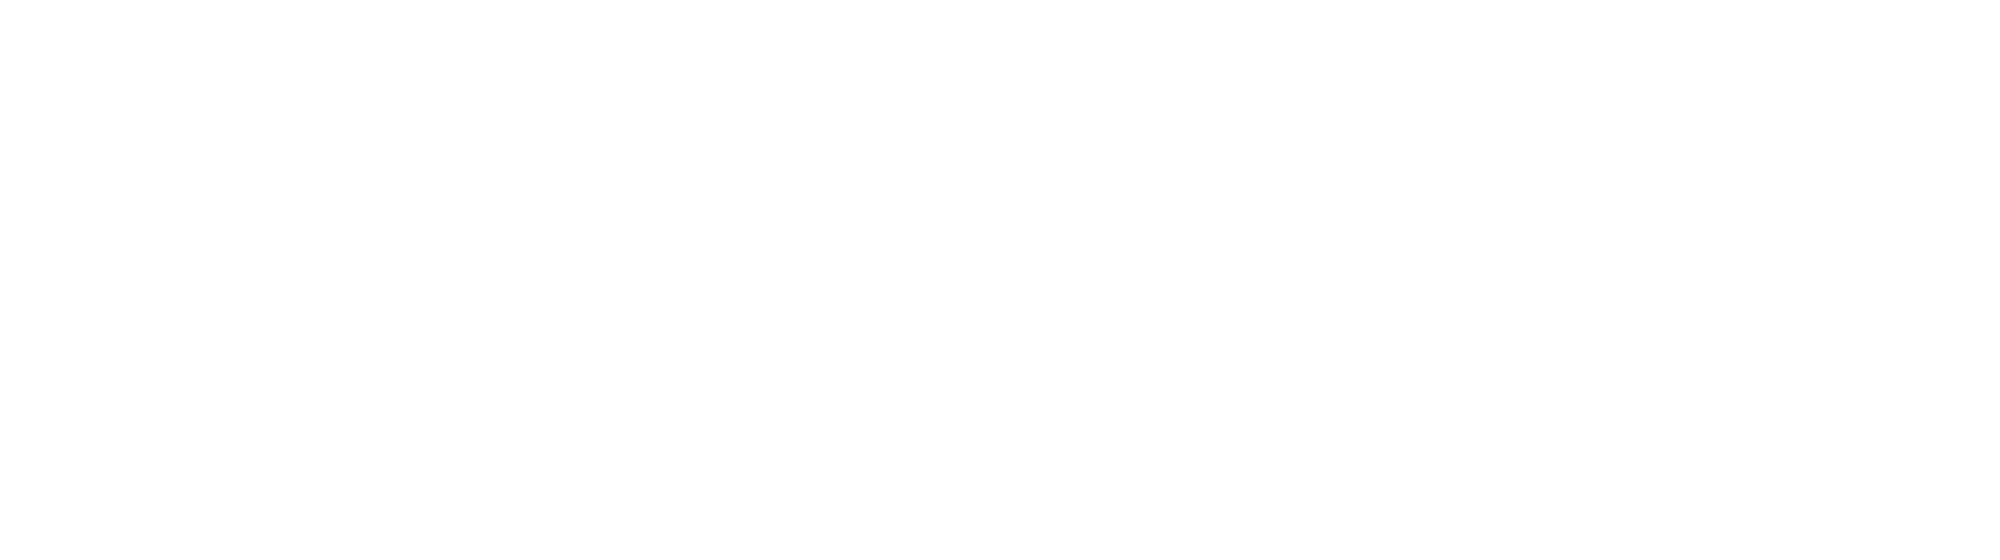 SMS CONCEPT SMSコンセプト